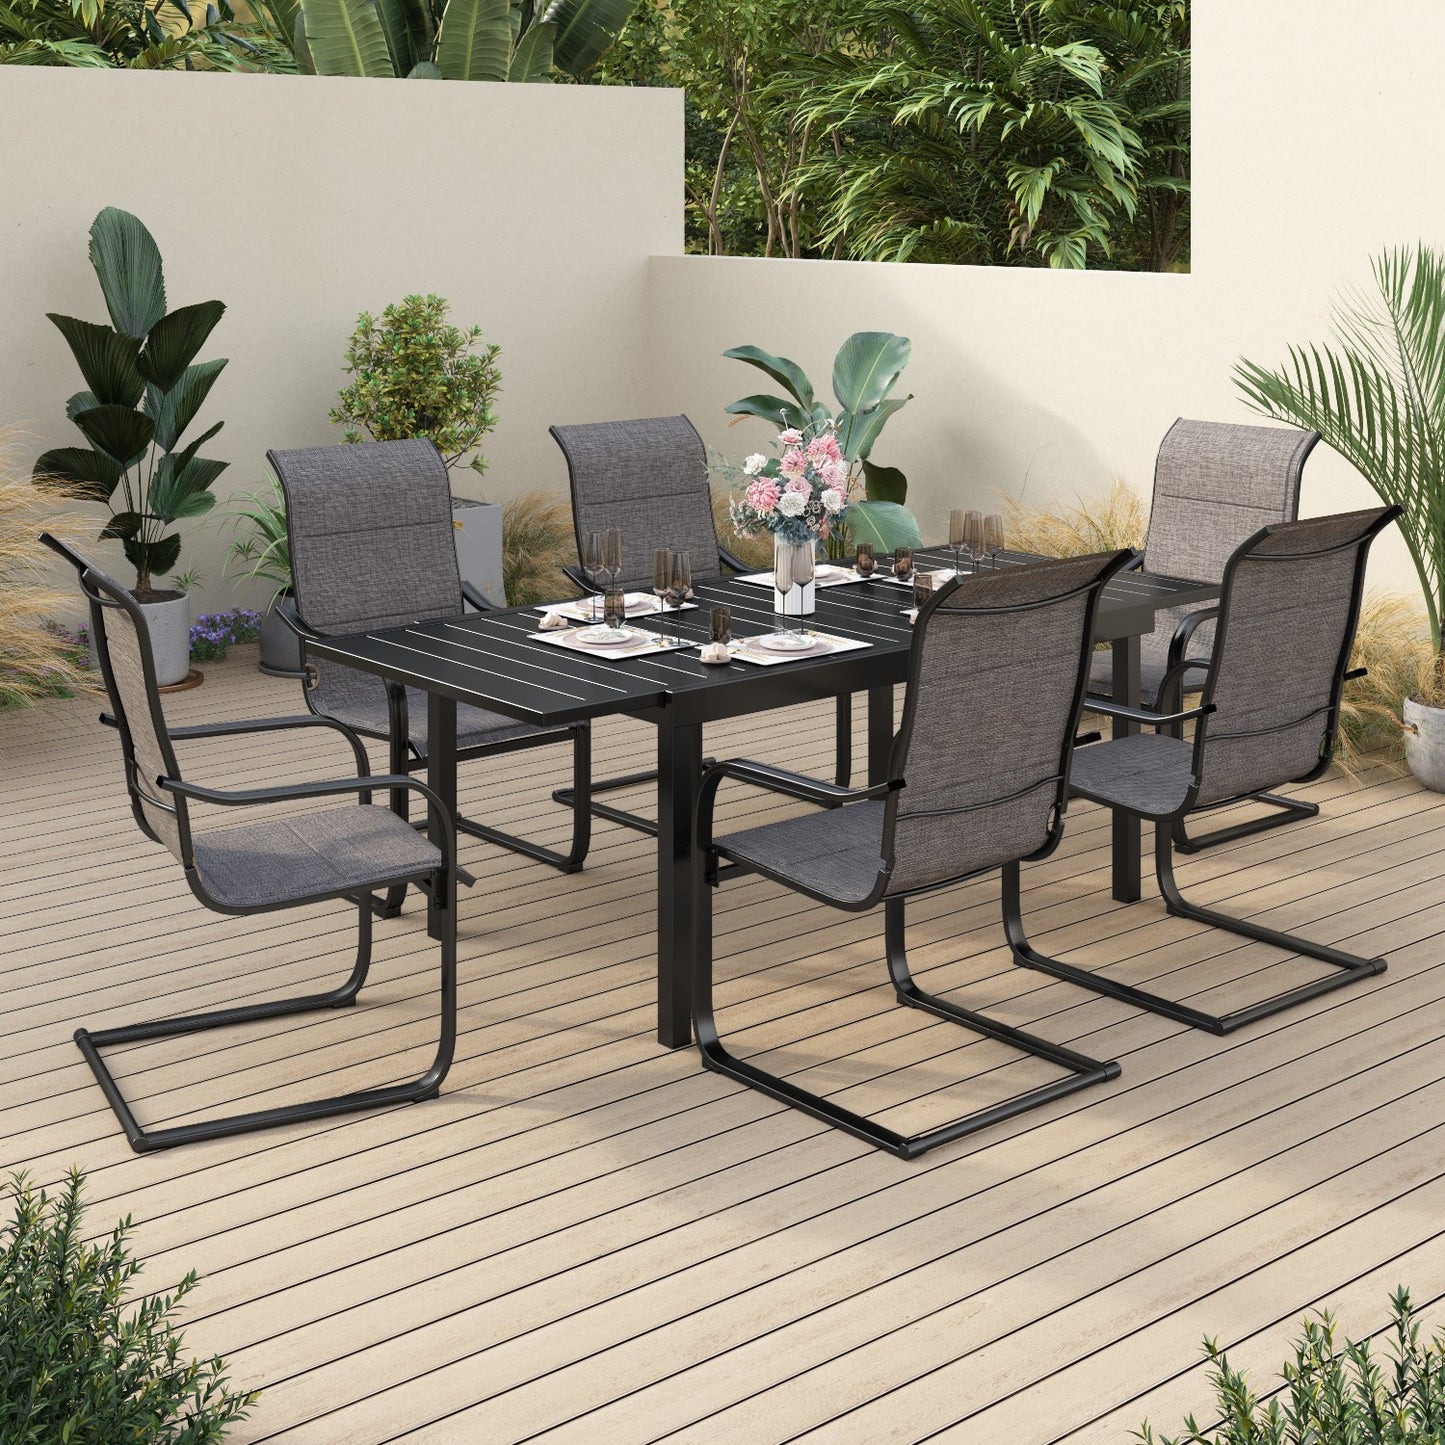 Sophia & William 7 Pieces Metal Patio Dining Set Paded Chairs and Extendable Table Set